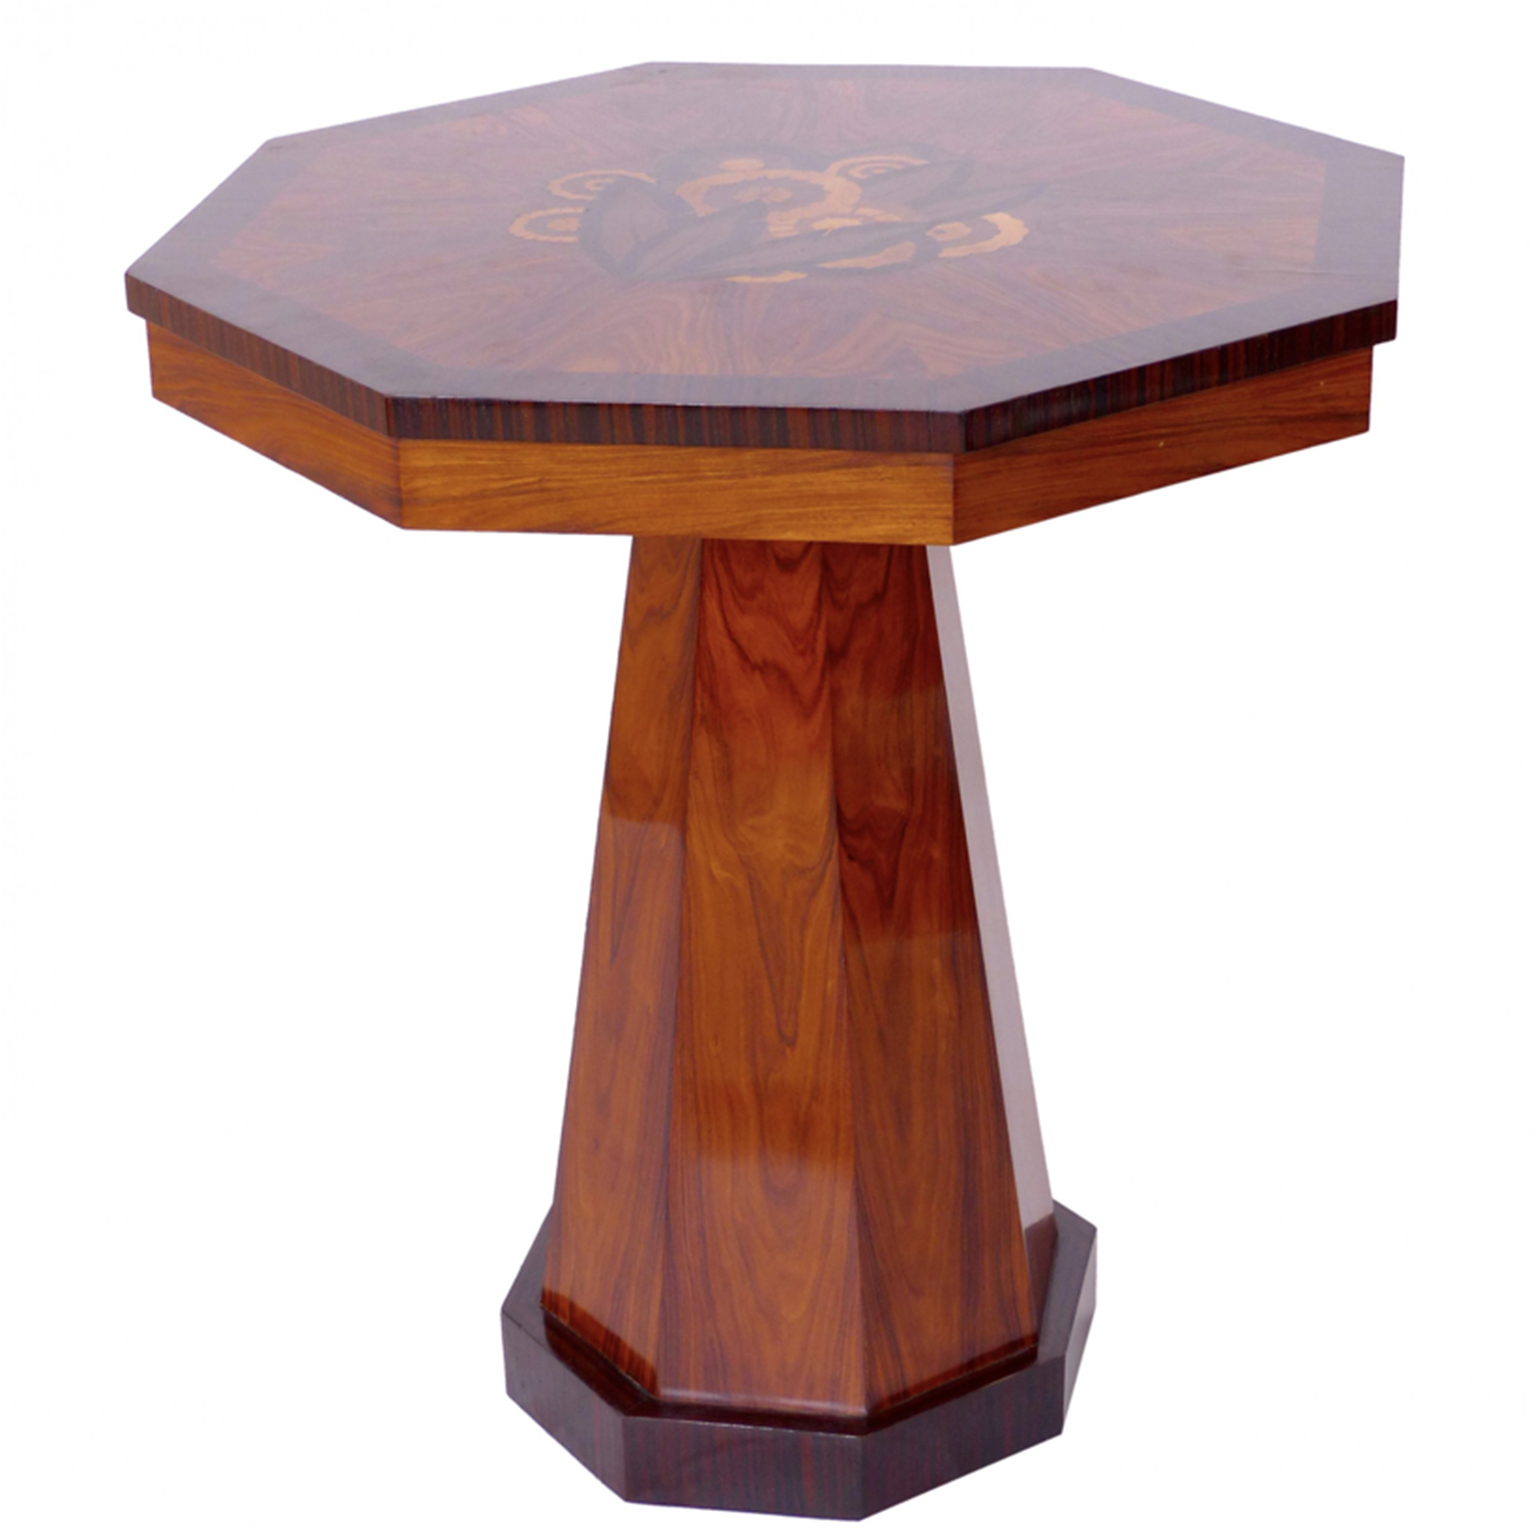 Art Deco octagonal side table made of walnut with intricate inlay in various fruit woods.